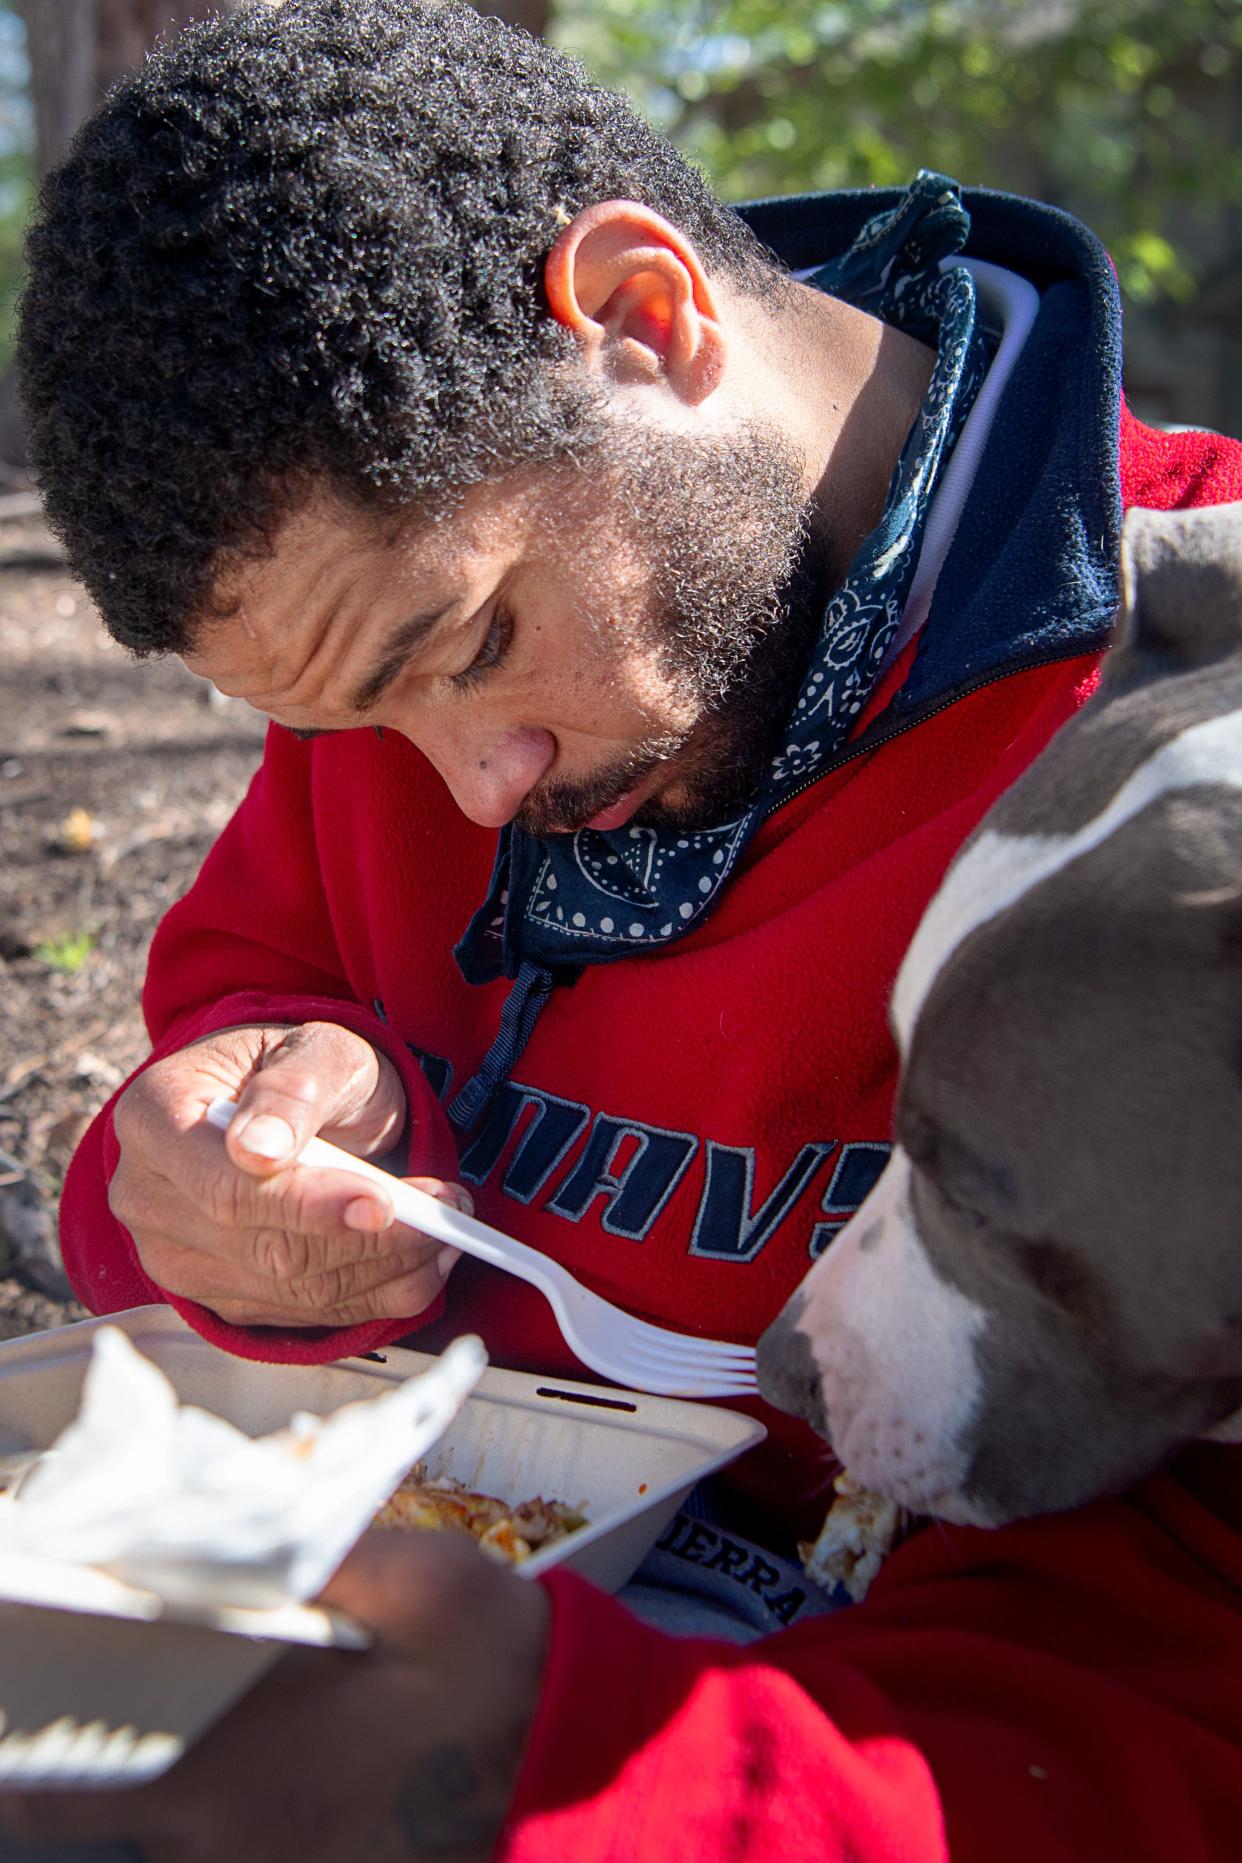 Reginald Bolden, Jr. shares his breakfast with his dog, Smoke, at ABCCM in Asheville, April 13, 2024. “It’s hard,” said Bolden of living on the street, though he finds solace in the bond he has with his canine partner. “It’s like a father holding their child for the first time, it’s the greatest feeling.”